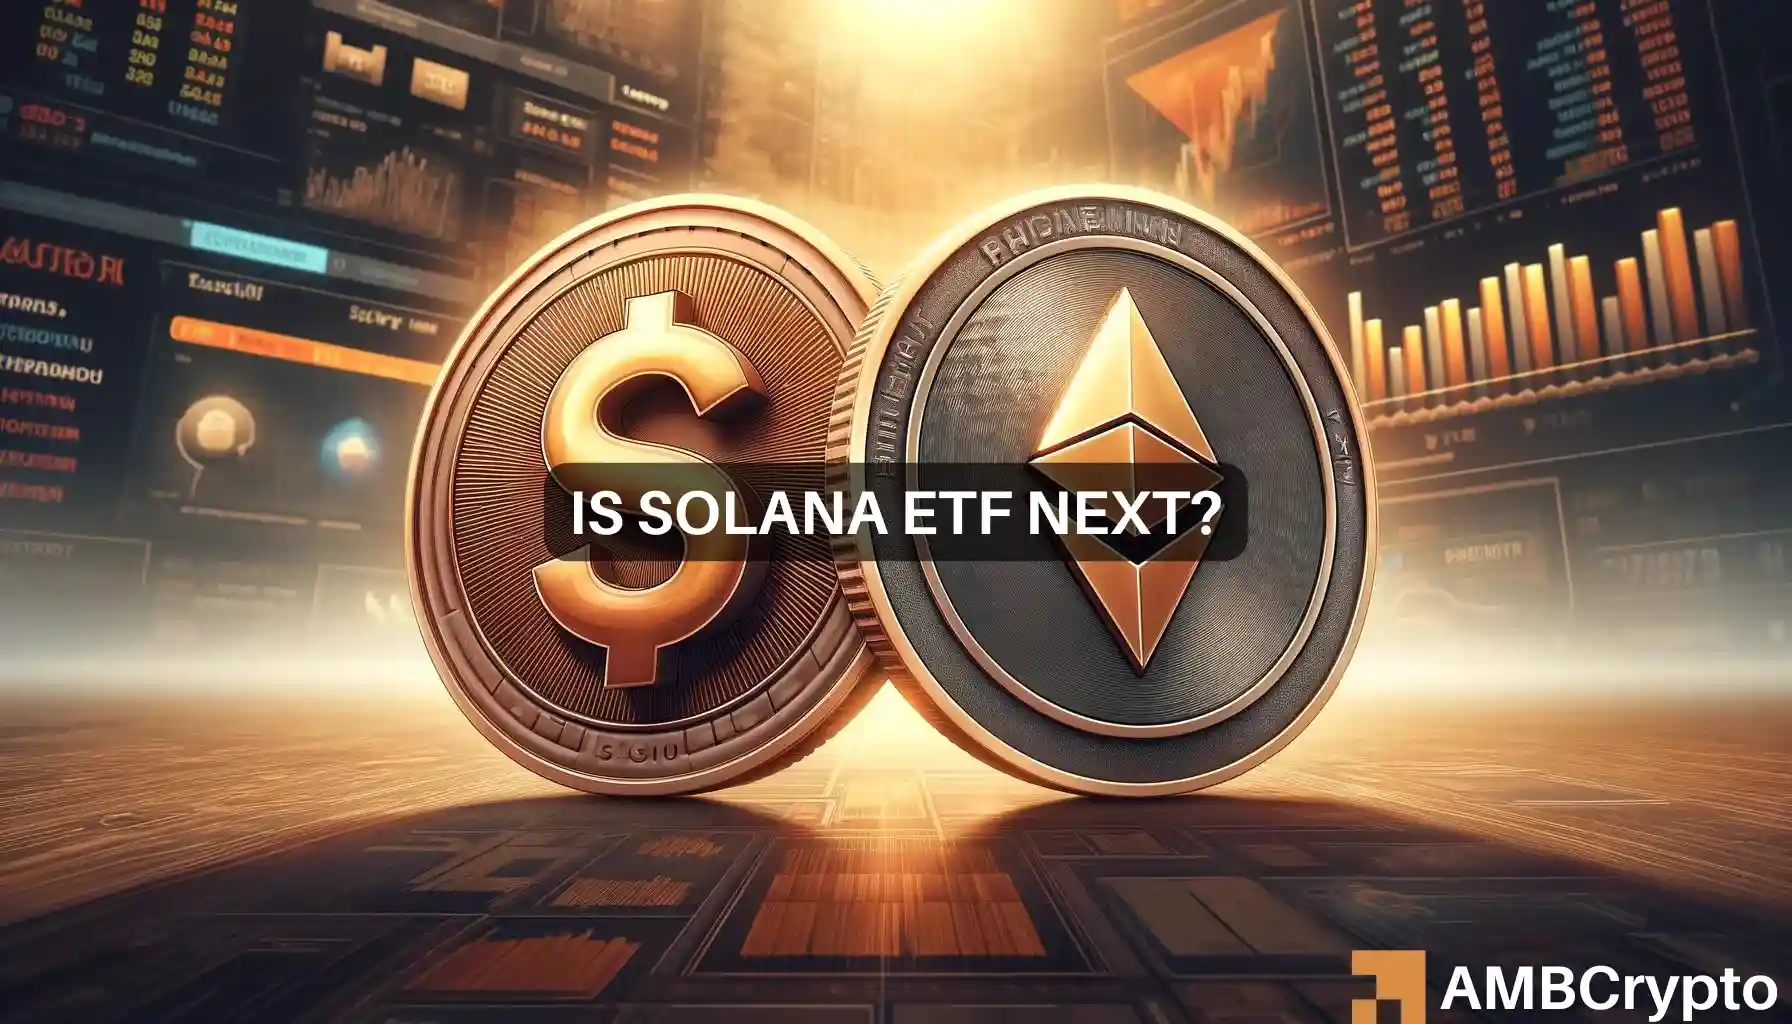 Could Solana be next in line for a spot ETF after Ethereum?